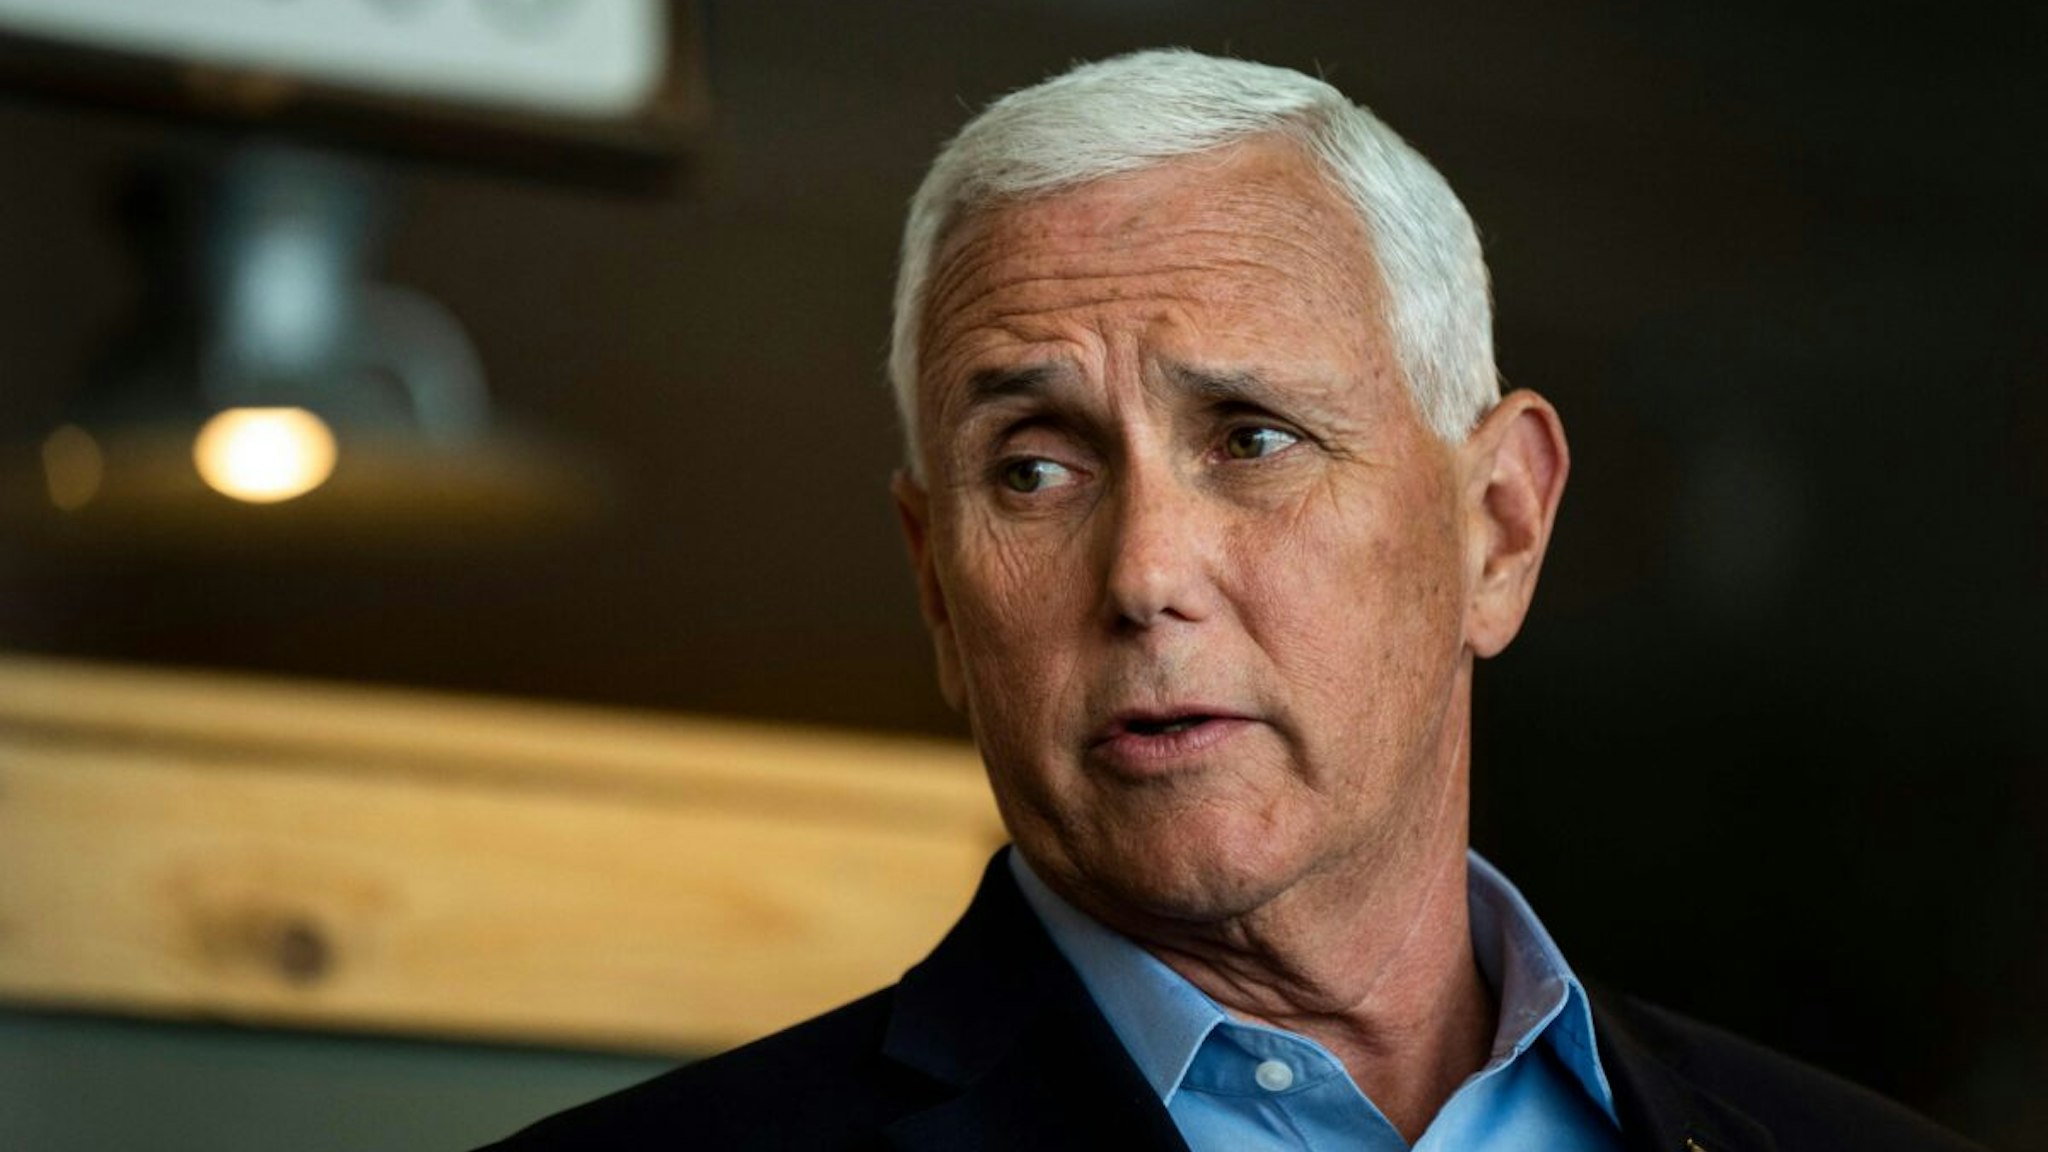 Former US Vice President Mike Pence speaks with members of the media during a campaign event at a Pizza Ranch restaurant in Waukee, Iowa on June 8, 2023.